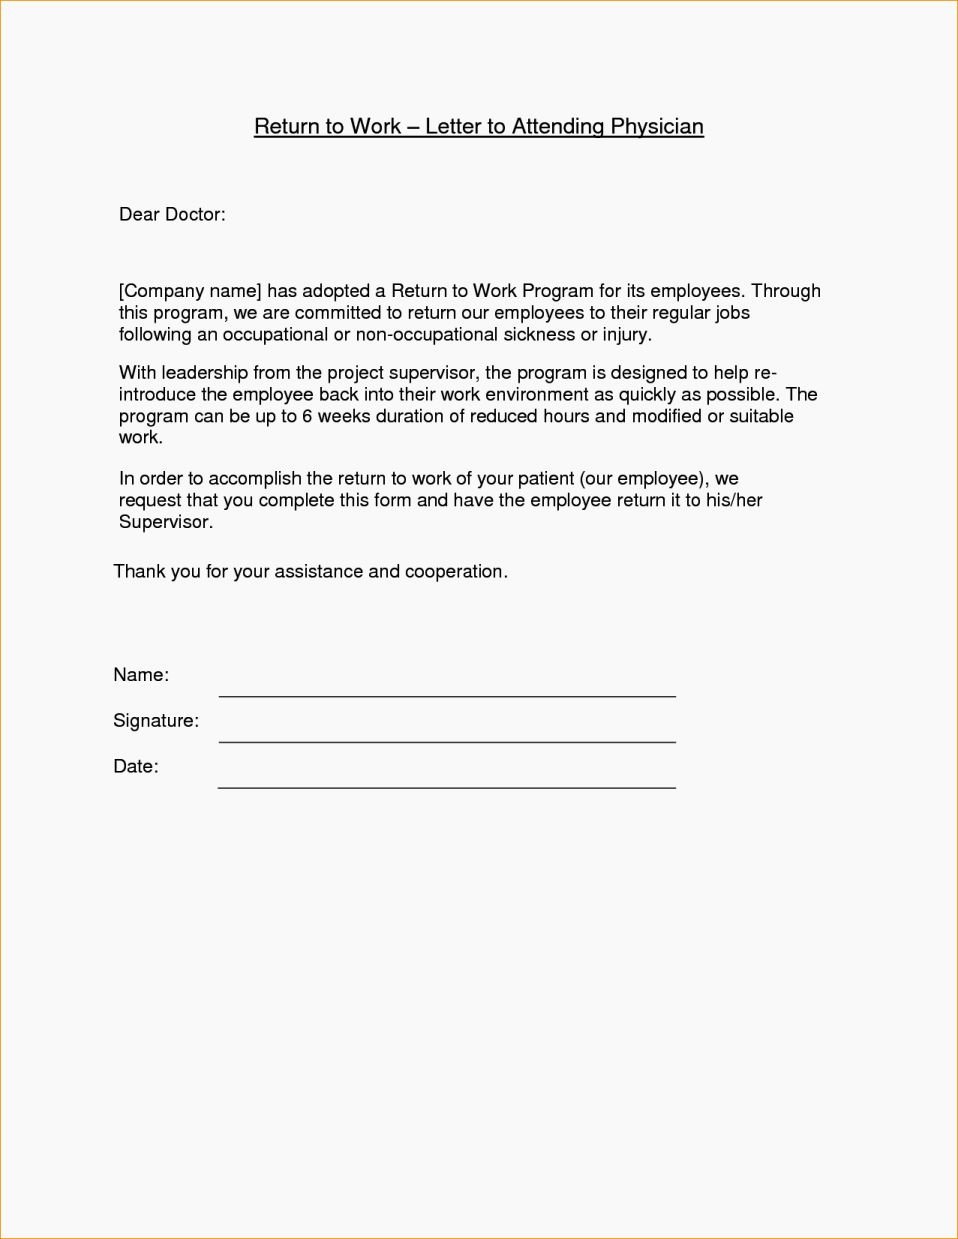 Cover Letter for Returning to Work